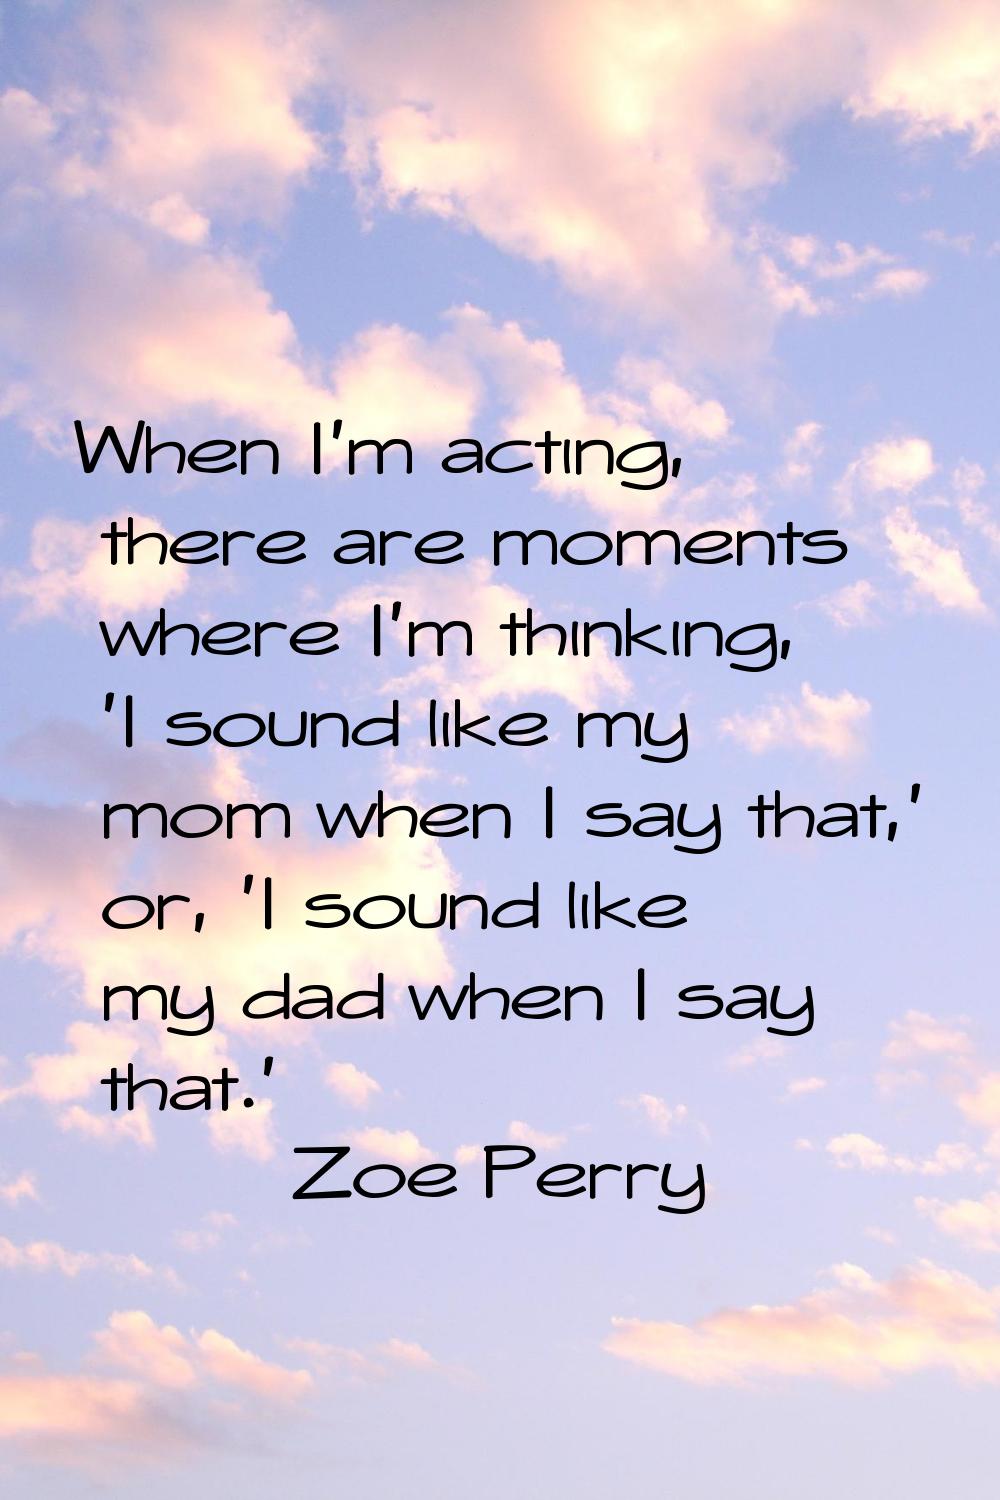 When I'm acting, there are moments where I'm thinking, 'I sound like my mom when I say that,' or, '